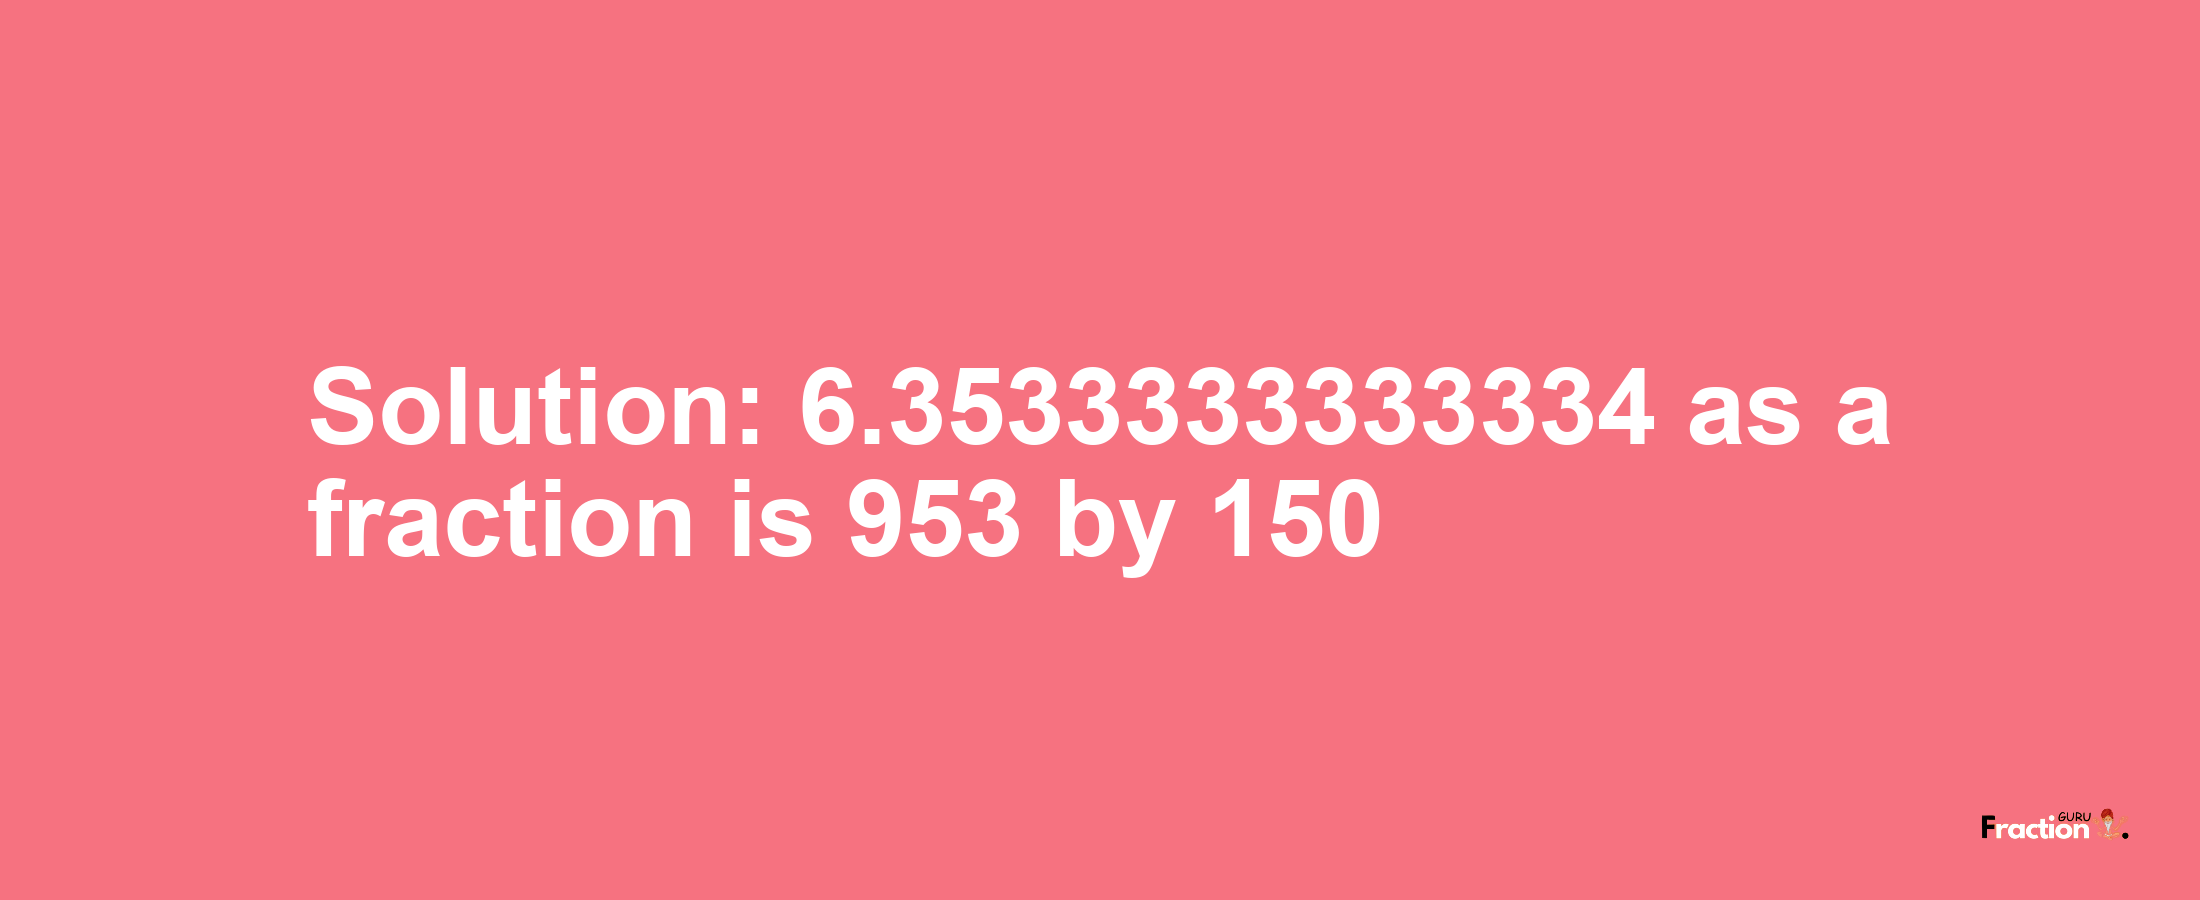 Solution:6.3533333333334 as a fraction is 953/150